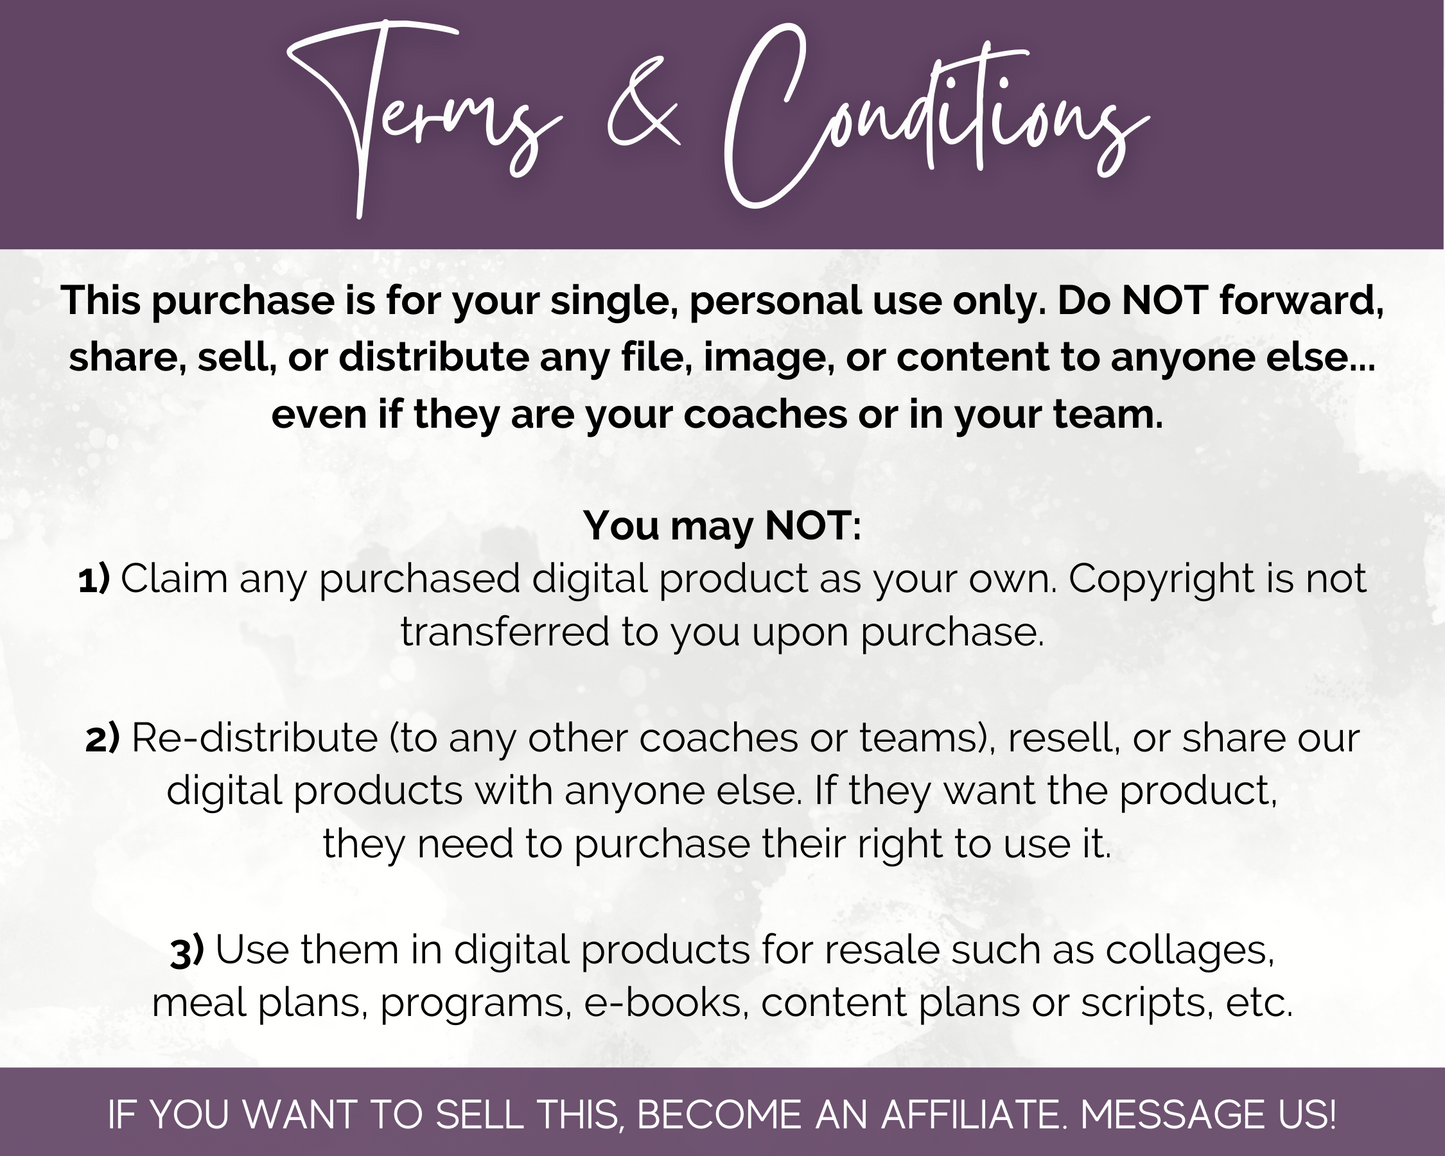 Empowering terms and conditions for the purchase of a "Girl Boss Style" Social Media Post Bundle with Canva Templates from Socially Inclined.